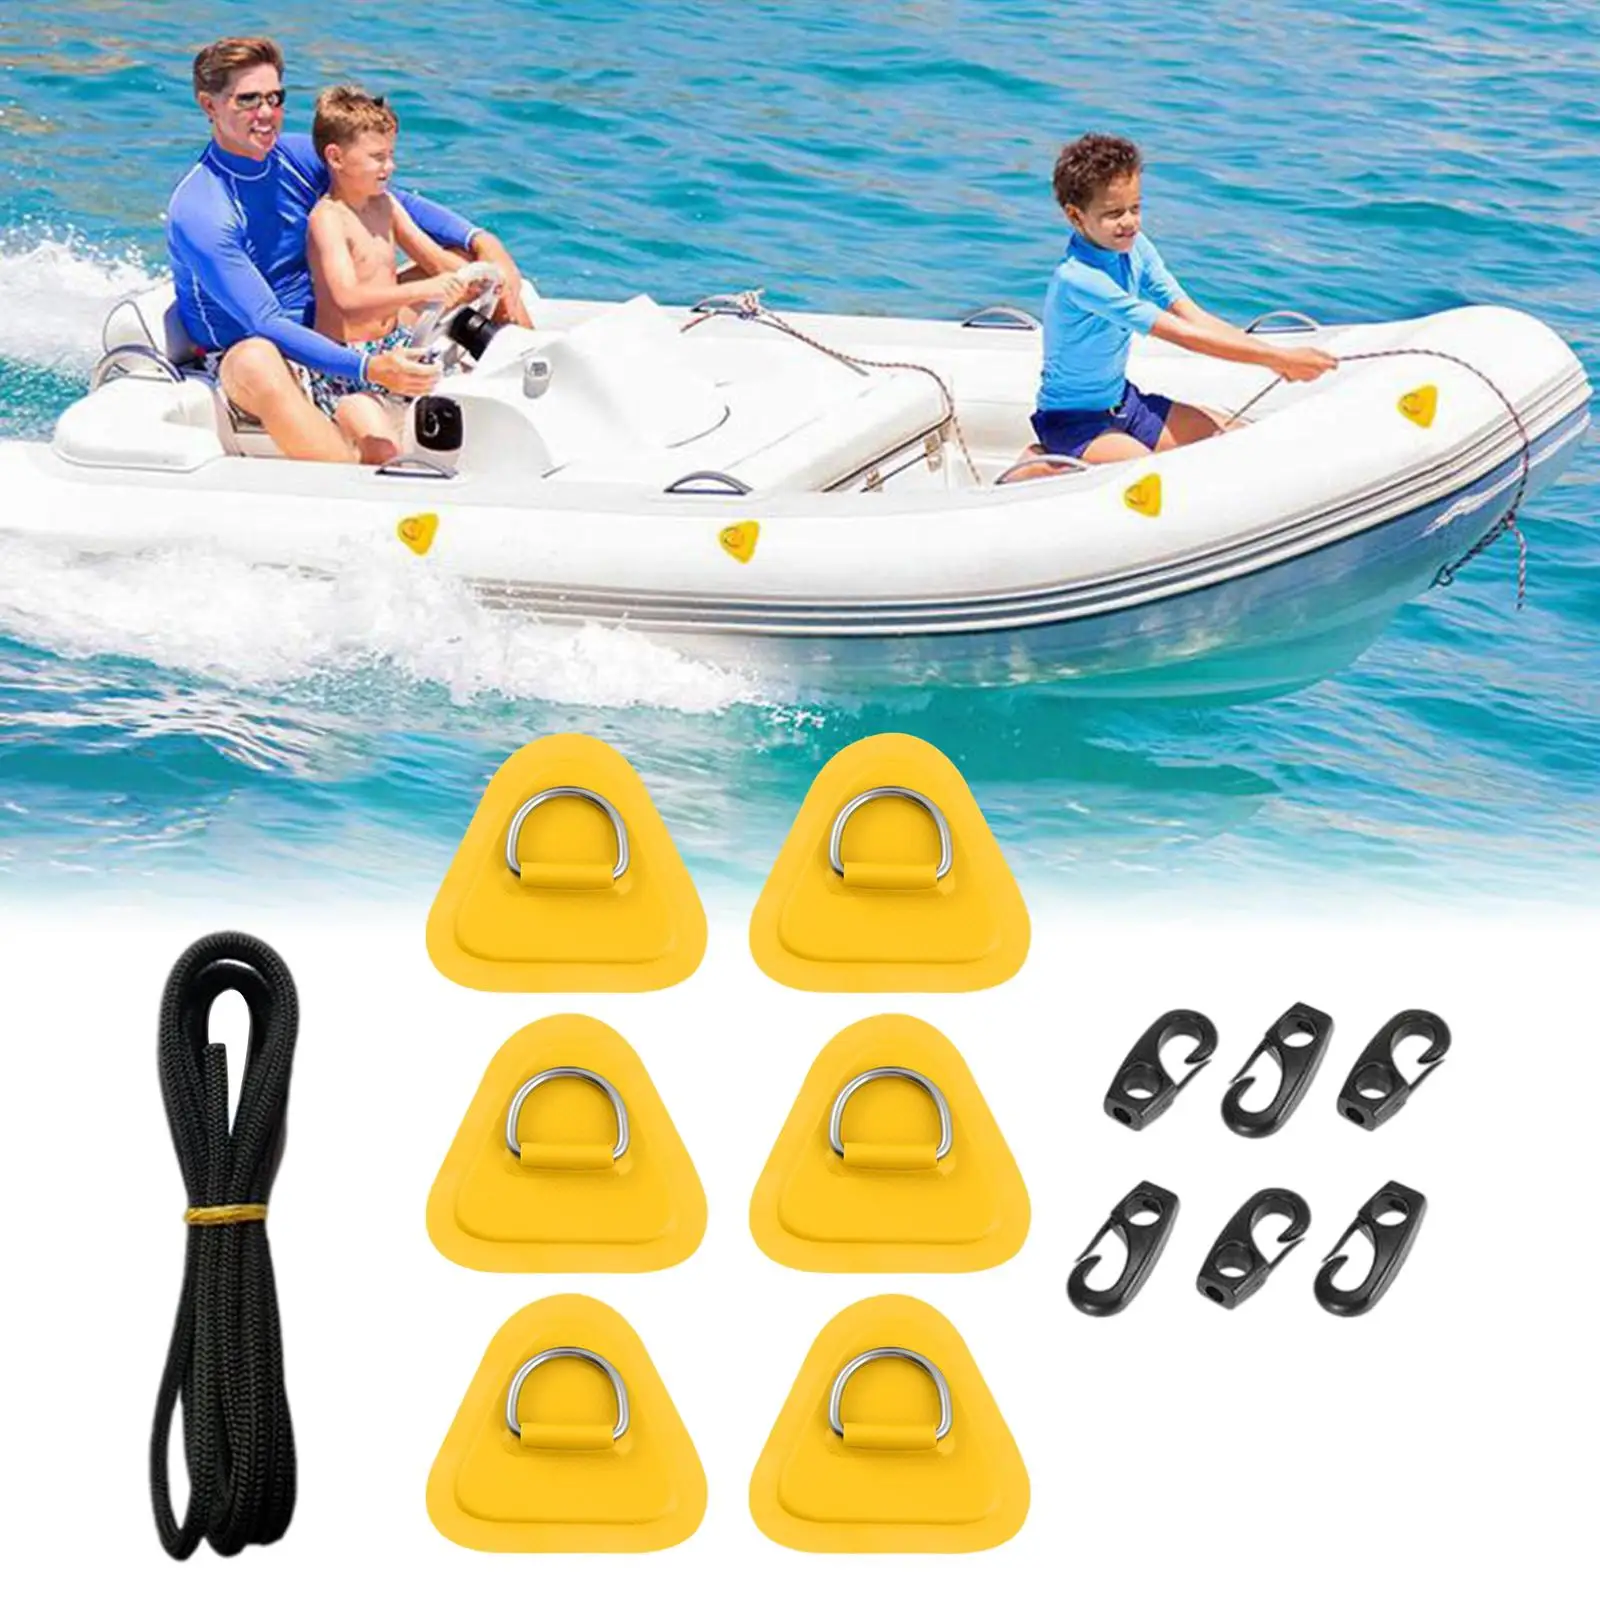 6x PVC , Deck Rigging D  Pad, for Surfboard Thigh Straps Inflatable Boat